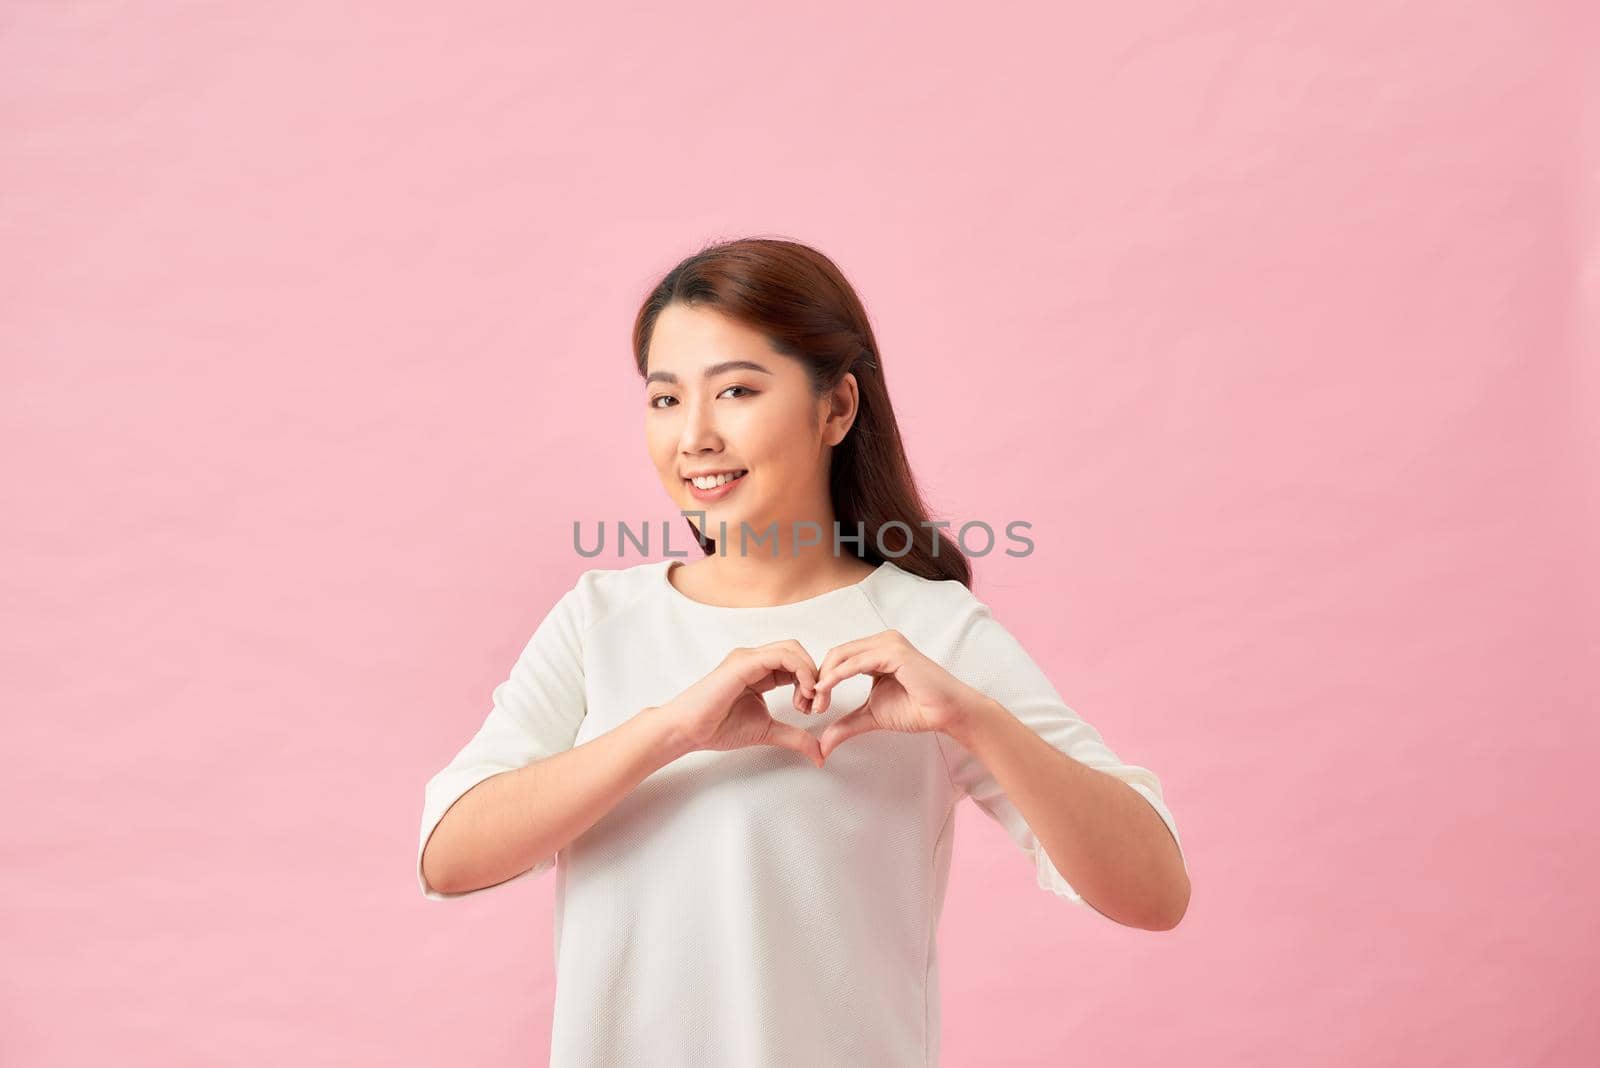 Closeup portrait smiling cheerful happy young woman making heart sign with hands isolated pink background